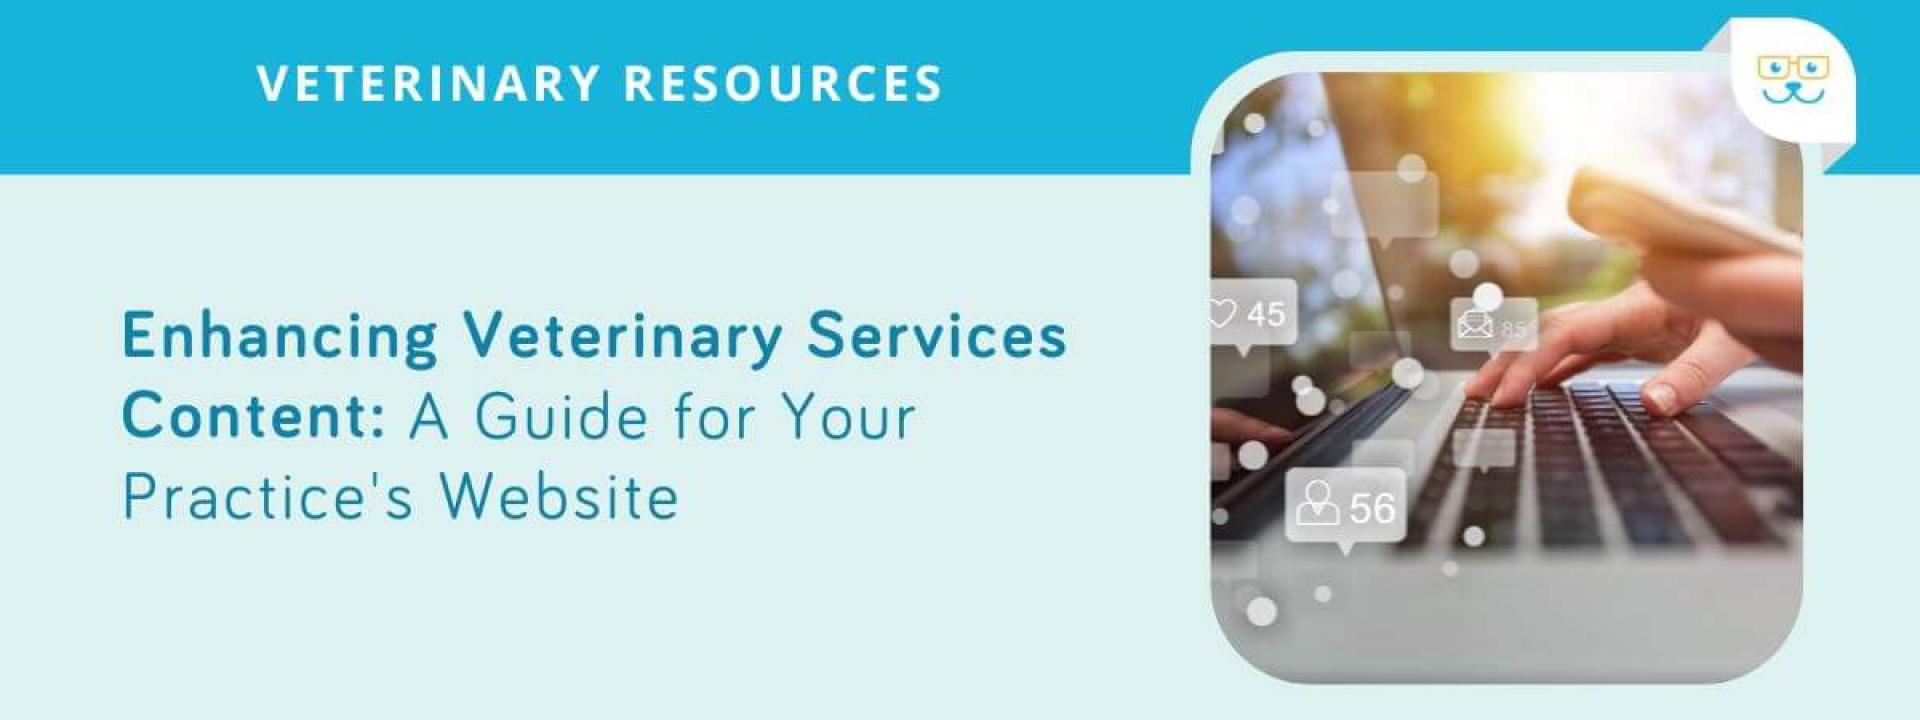 Enhancing Veterinary Services Content: A Guide for Your Practice's Website